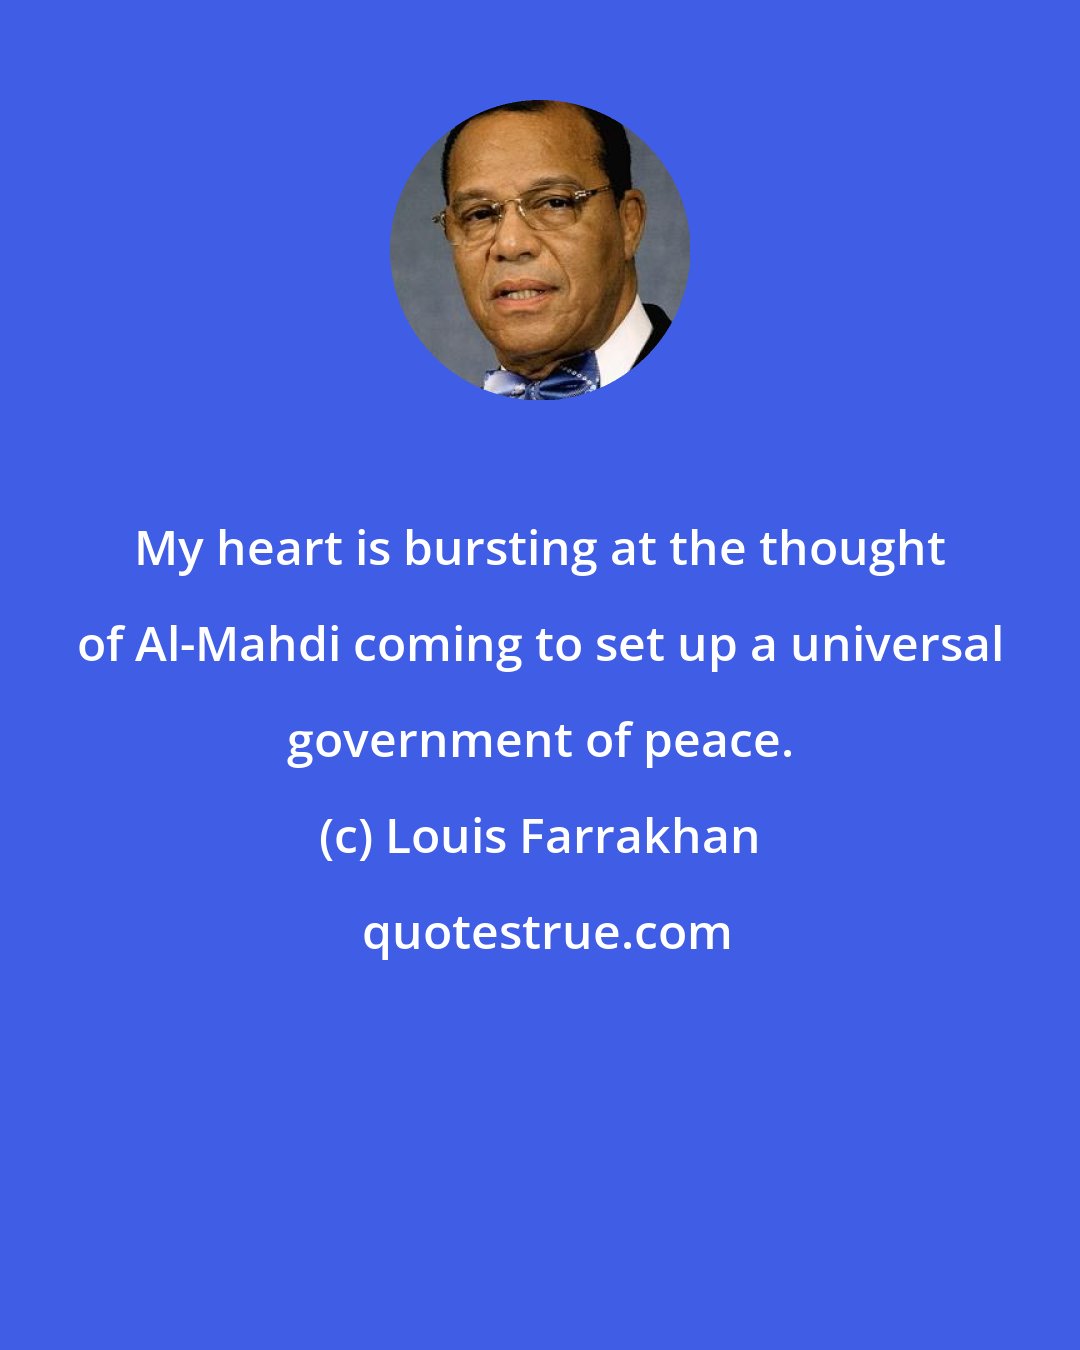 Louis Farrakhan: My heart is bursting at the thought of Al-Mahdi coming to set up a universal government of peace.